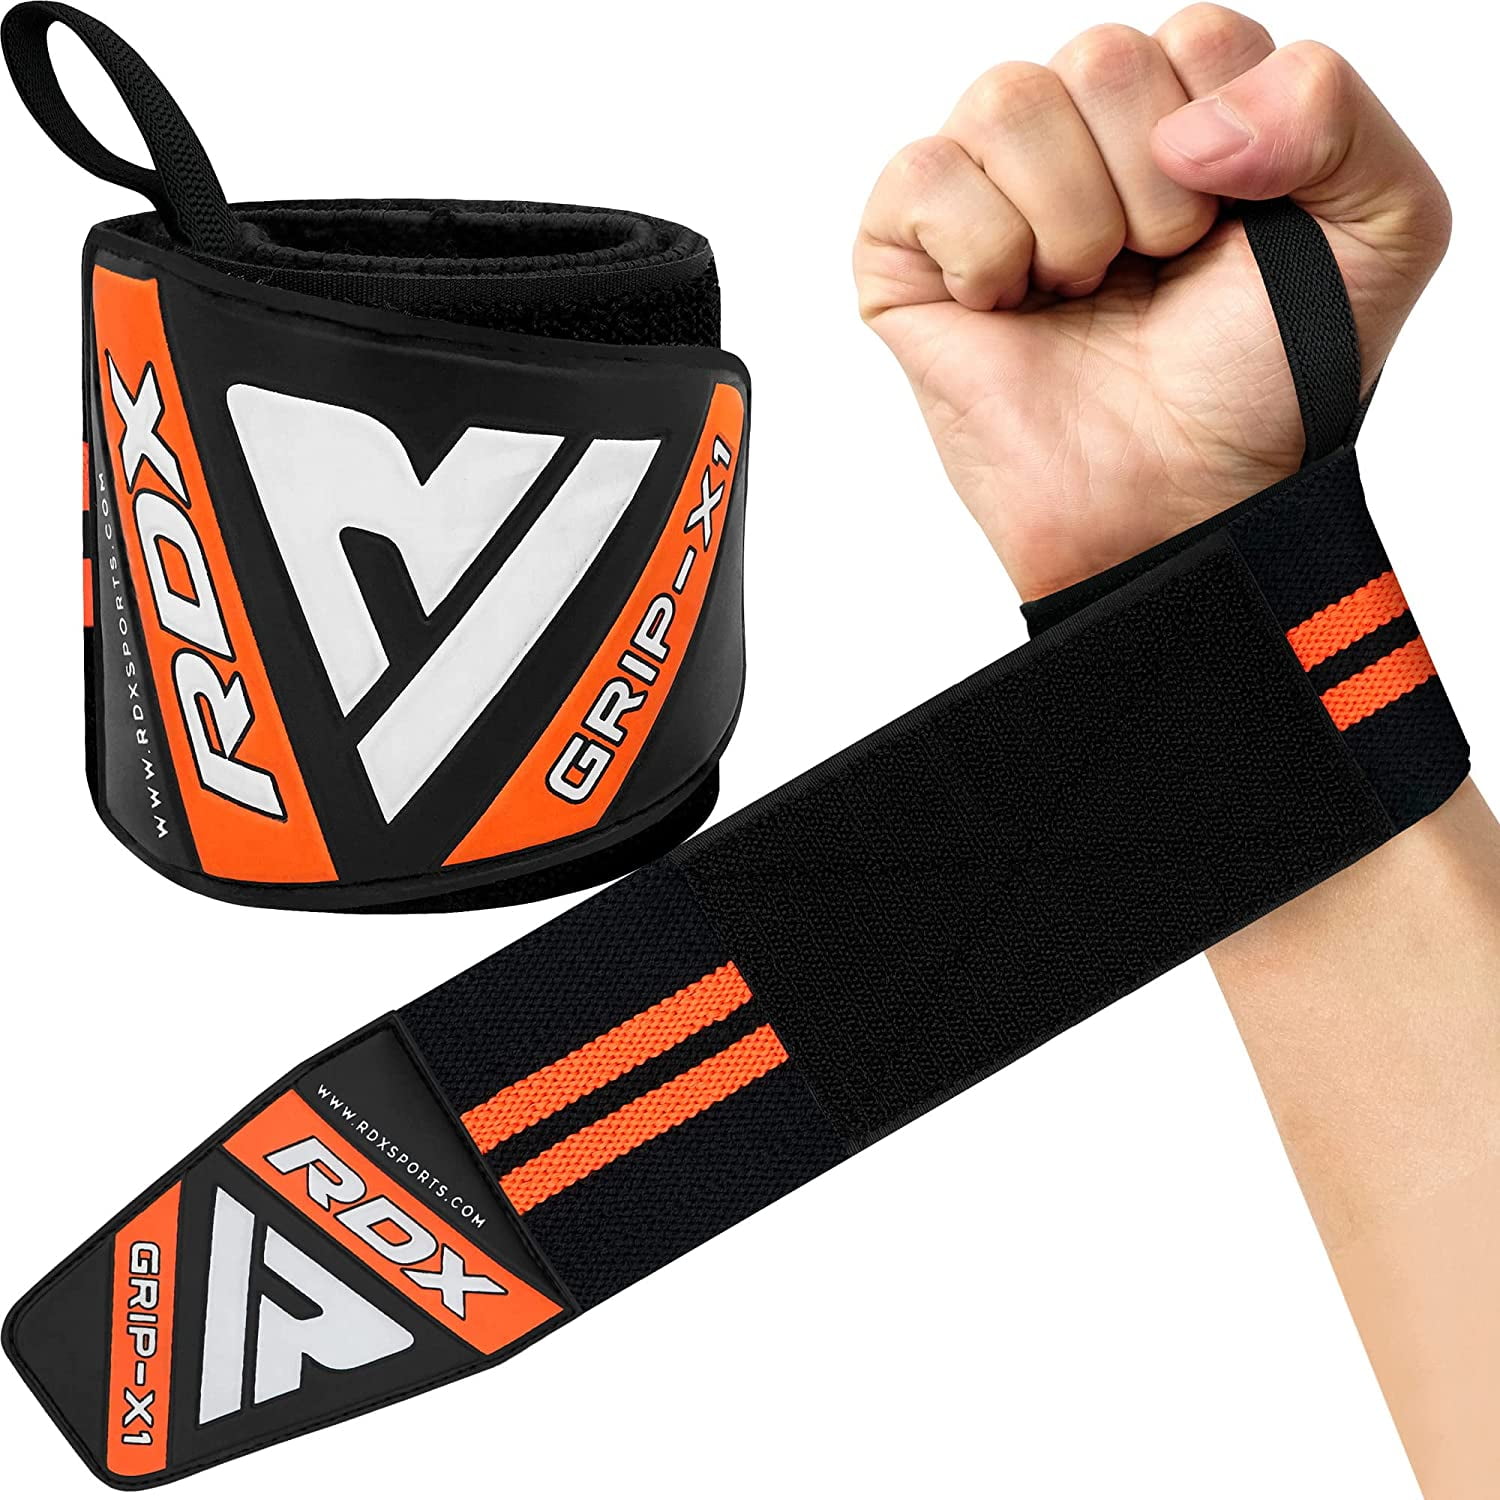 Crossfit Bodybuilding For Weight Lifting Lifting Straps Cotton Lifting Straps With Adjustable Padded Wrist Wrap Assist Grip Strength Non-slip Lifting Straps For Men & Women Powerlifting Xfit